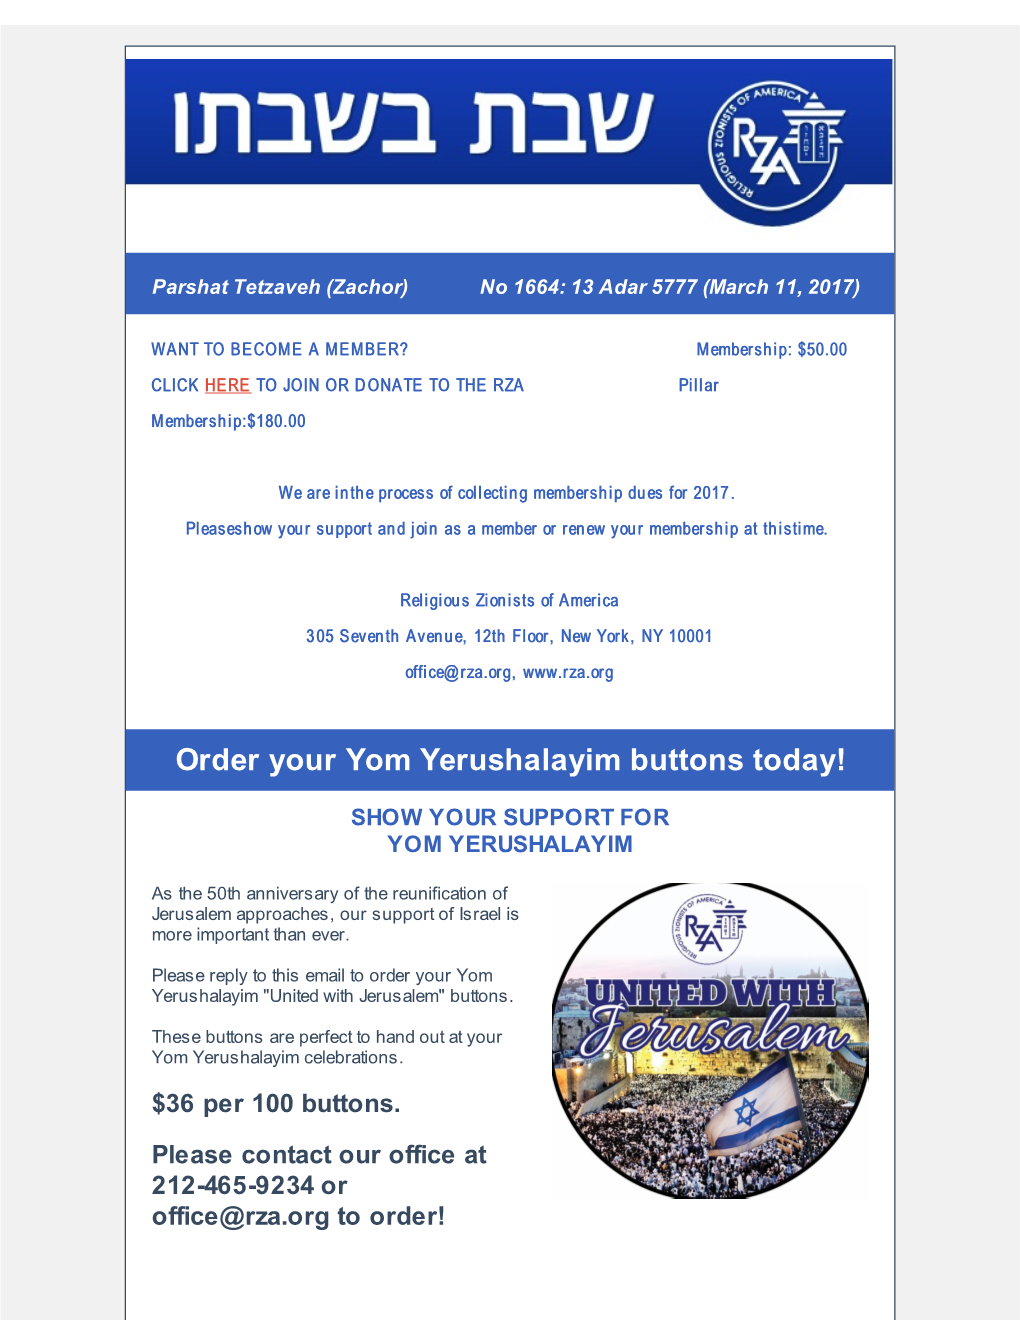 Order Your Yom Yerushalayim Buttons Today!